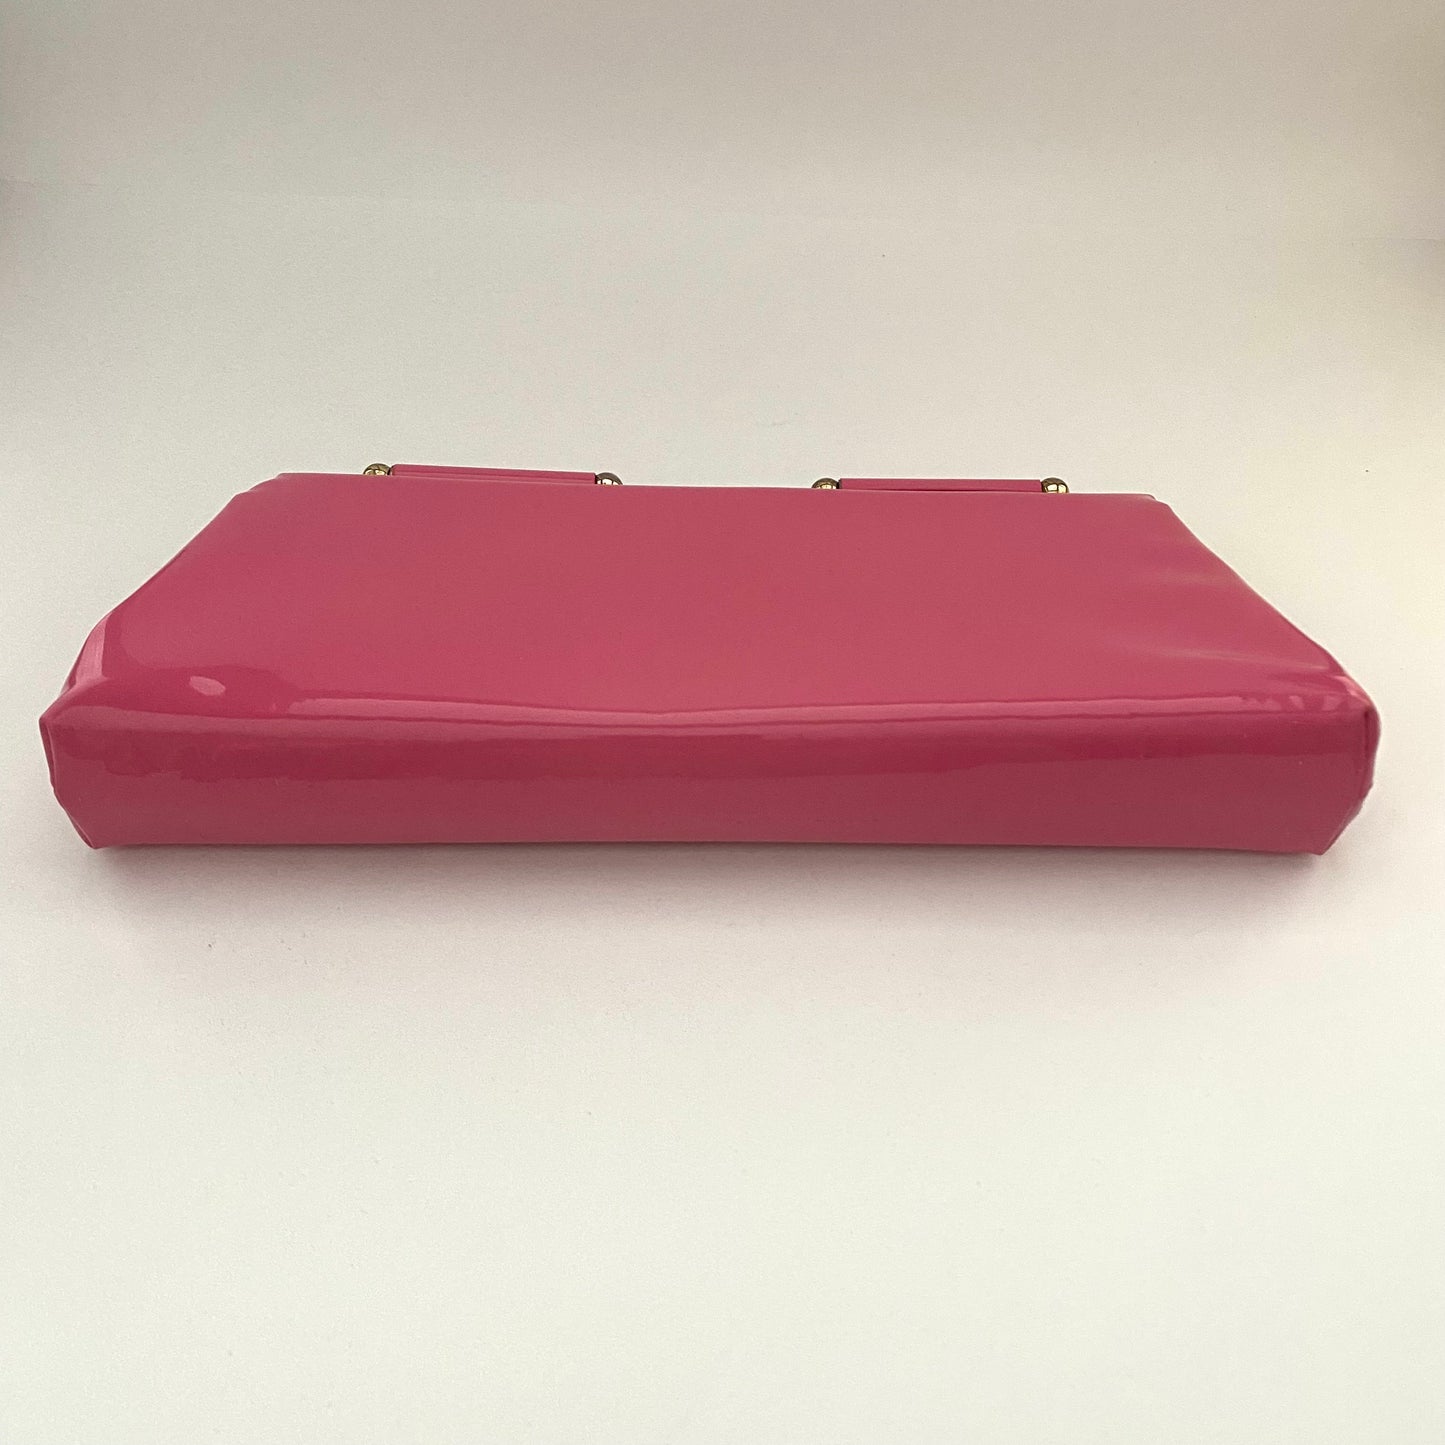 1960s Pink Patent Leather Clutch With Optional Chain Handle